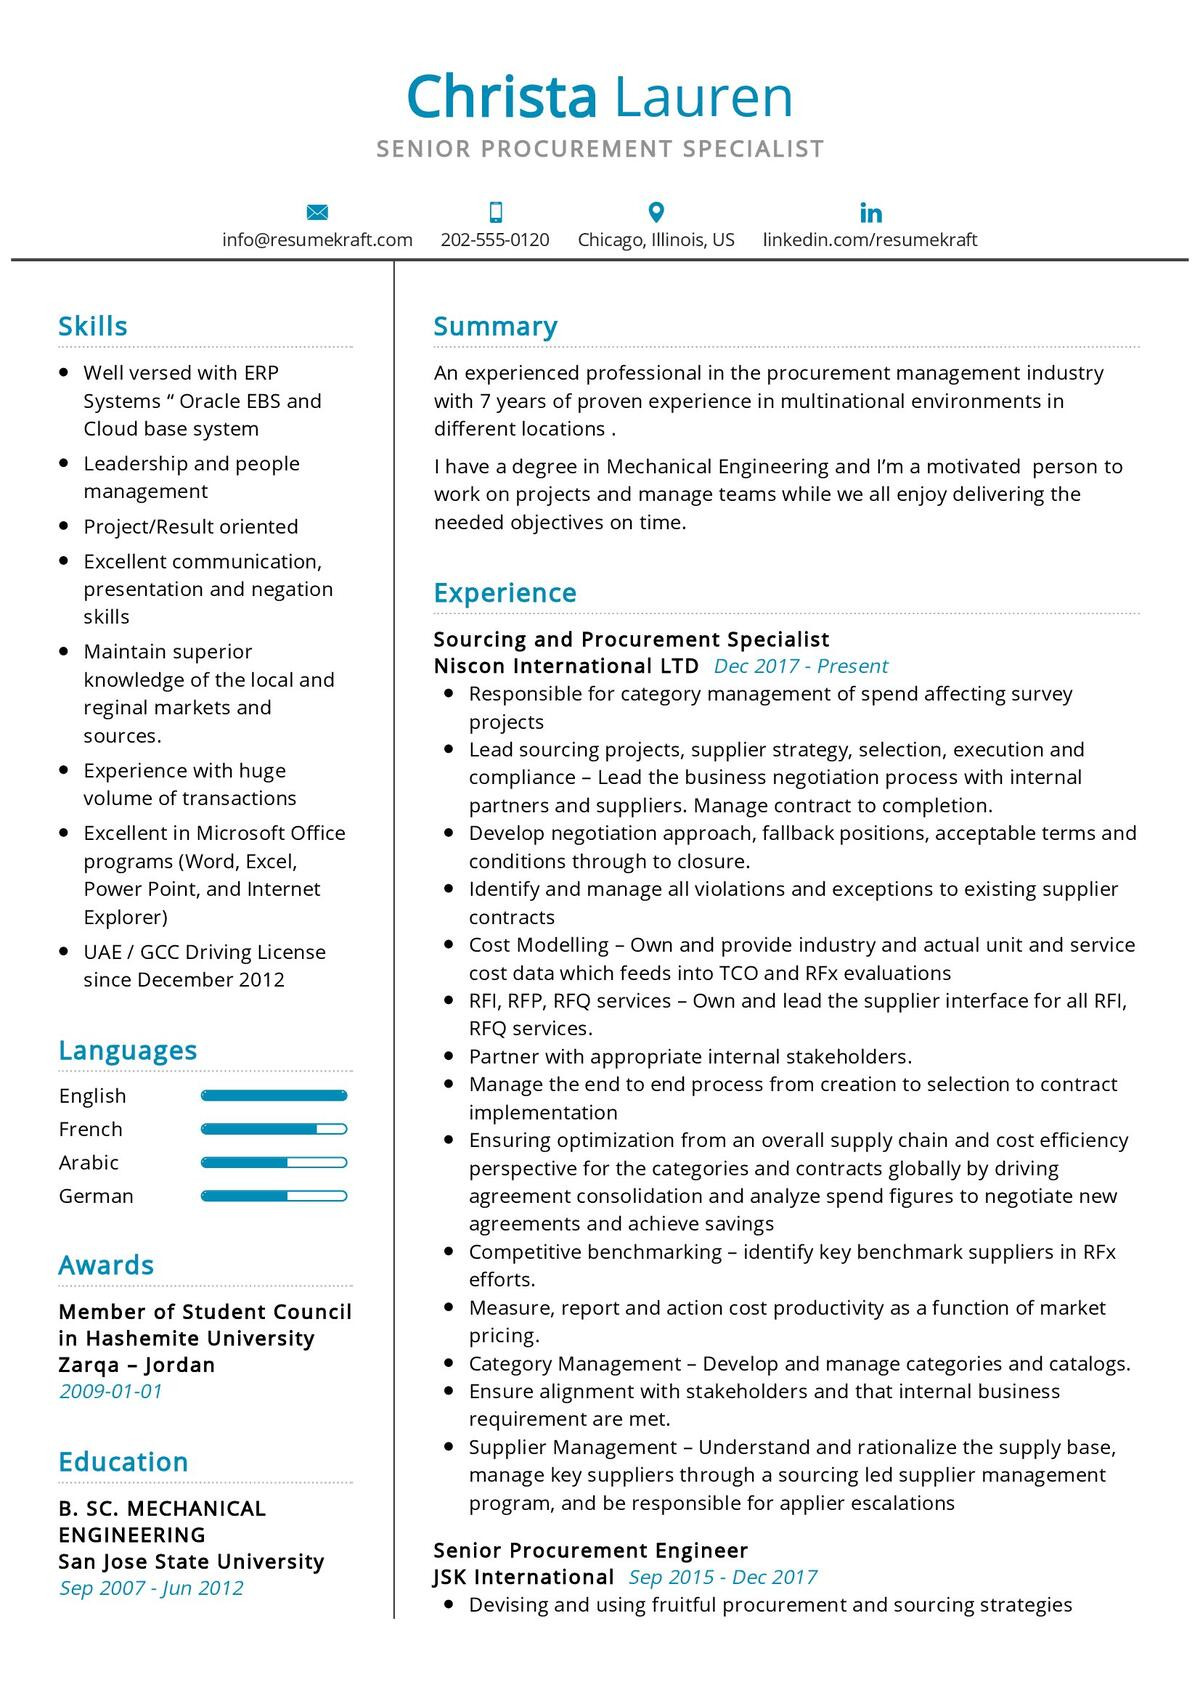 Sample Resume for Senior Contract Specialist Senior Procurement Specialist Resume 2021 Writing Tips – Resumekraft